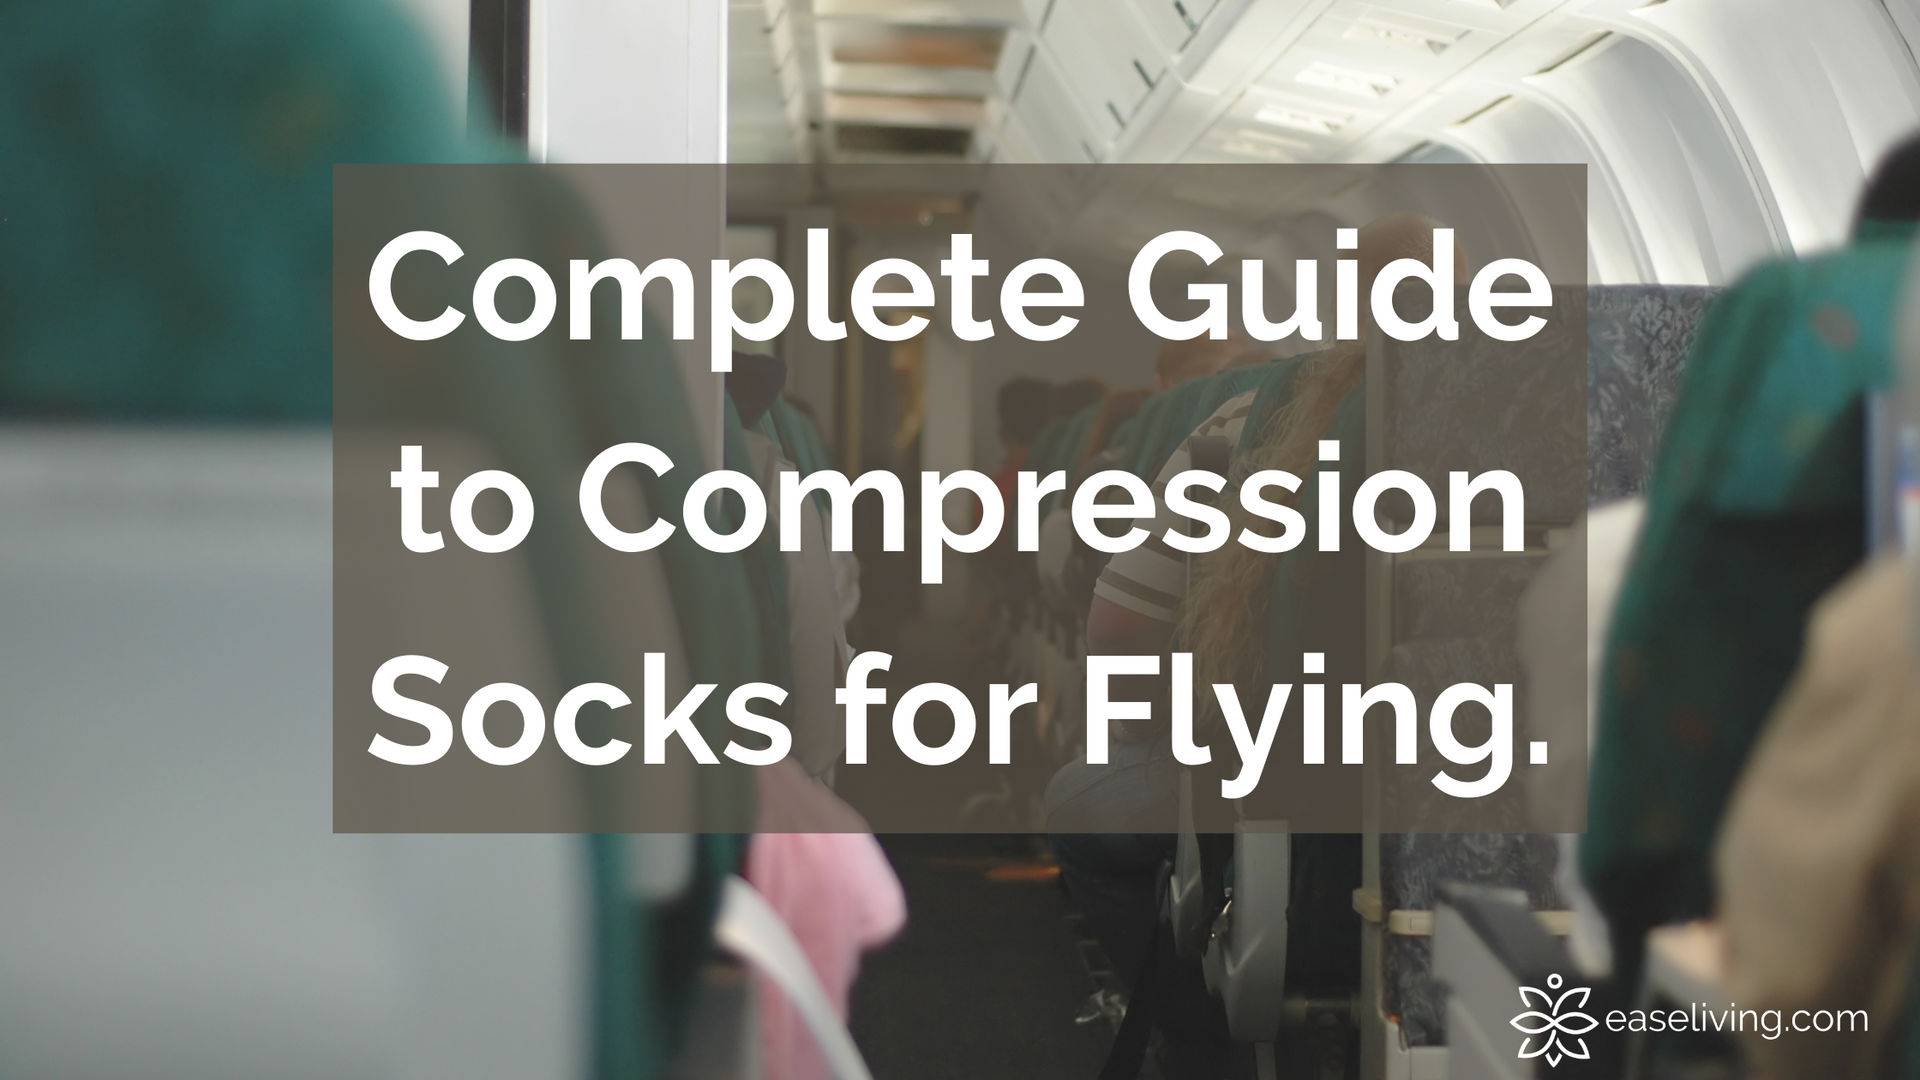 Ultimate Guide to Flight Socks: Are They Really a Good Idea? - The